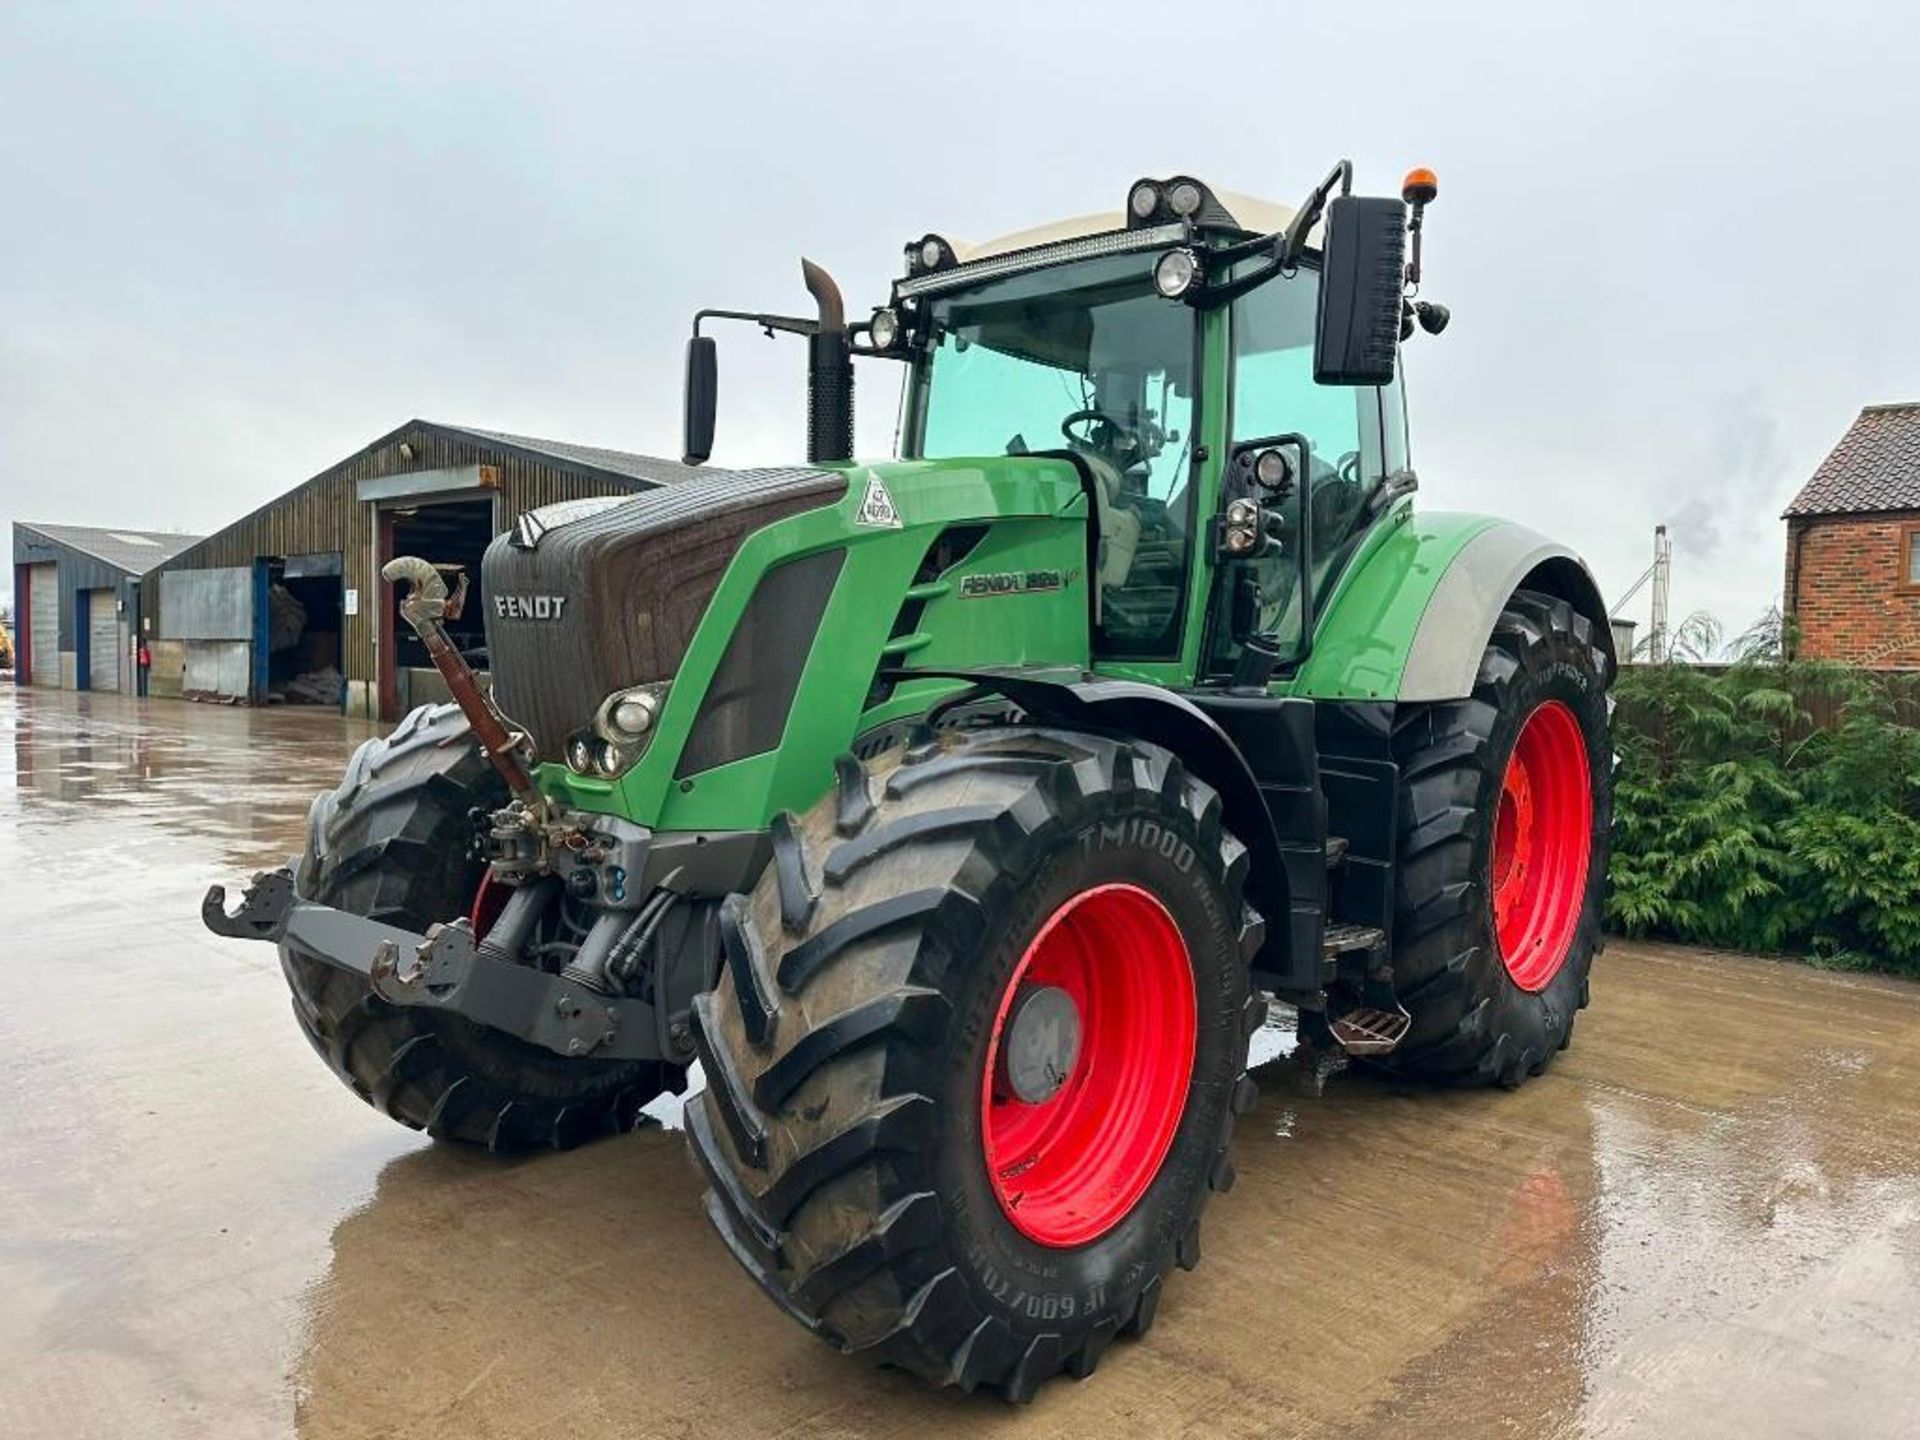 2013 Fendt 828 Vario tractor, 4wd, front linkage, front spool valves, 4No rear spool valves, Bill Be - Image 13 of 23